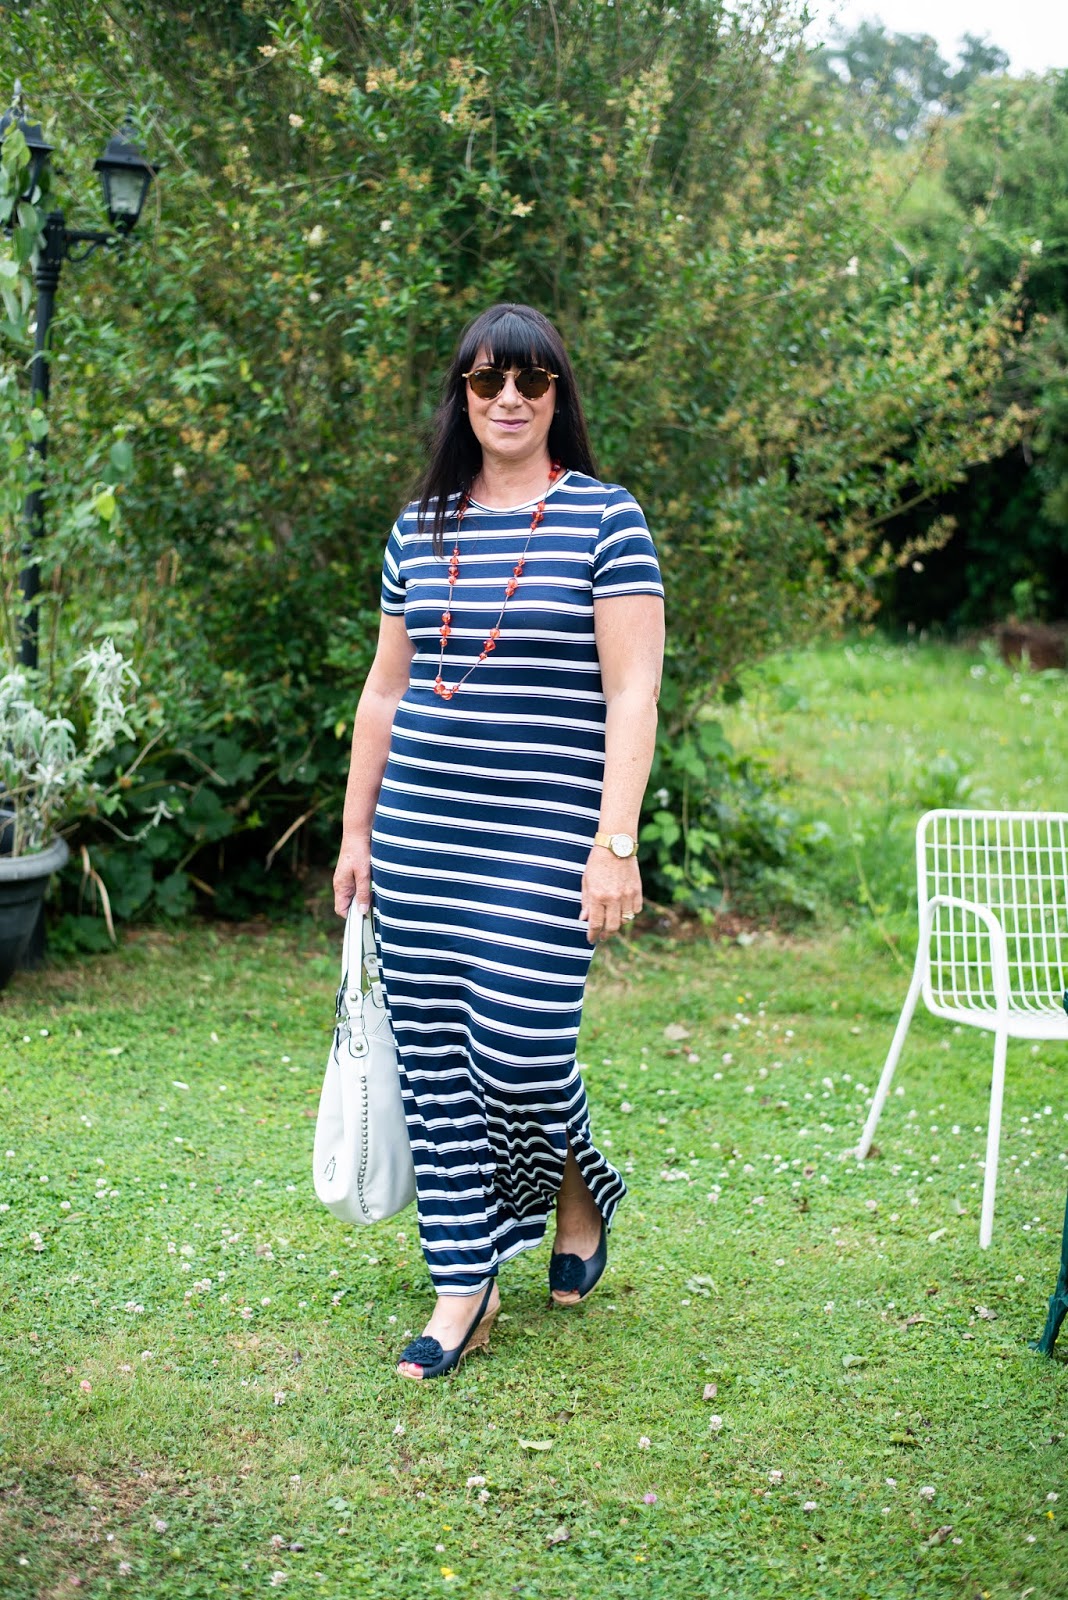 Looking Hot in Hotter Shoes! - #Chicandstylish #LINKUP | Mummabstylish